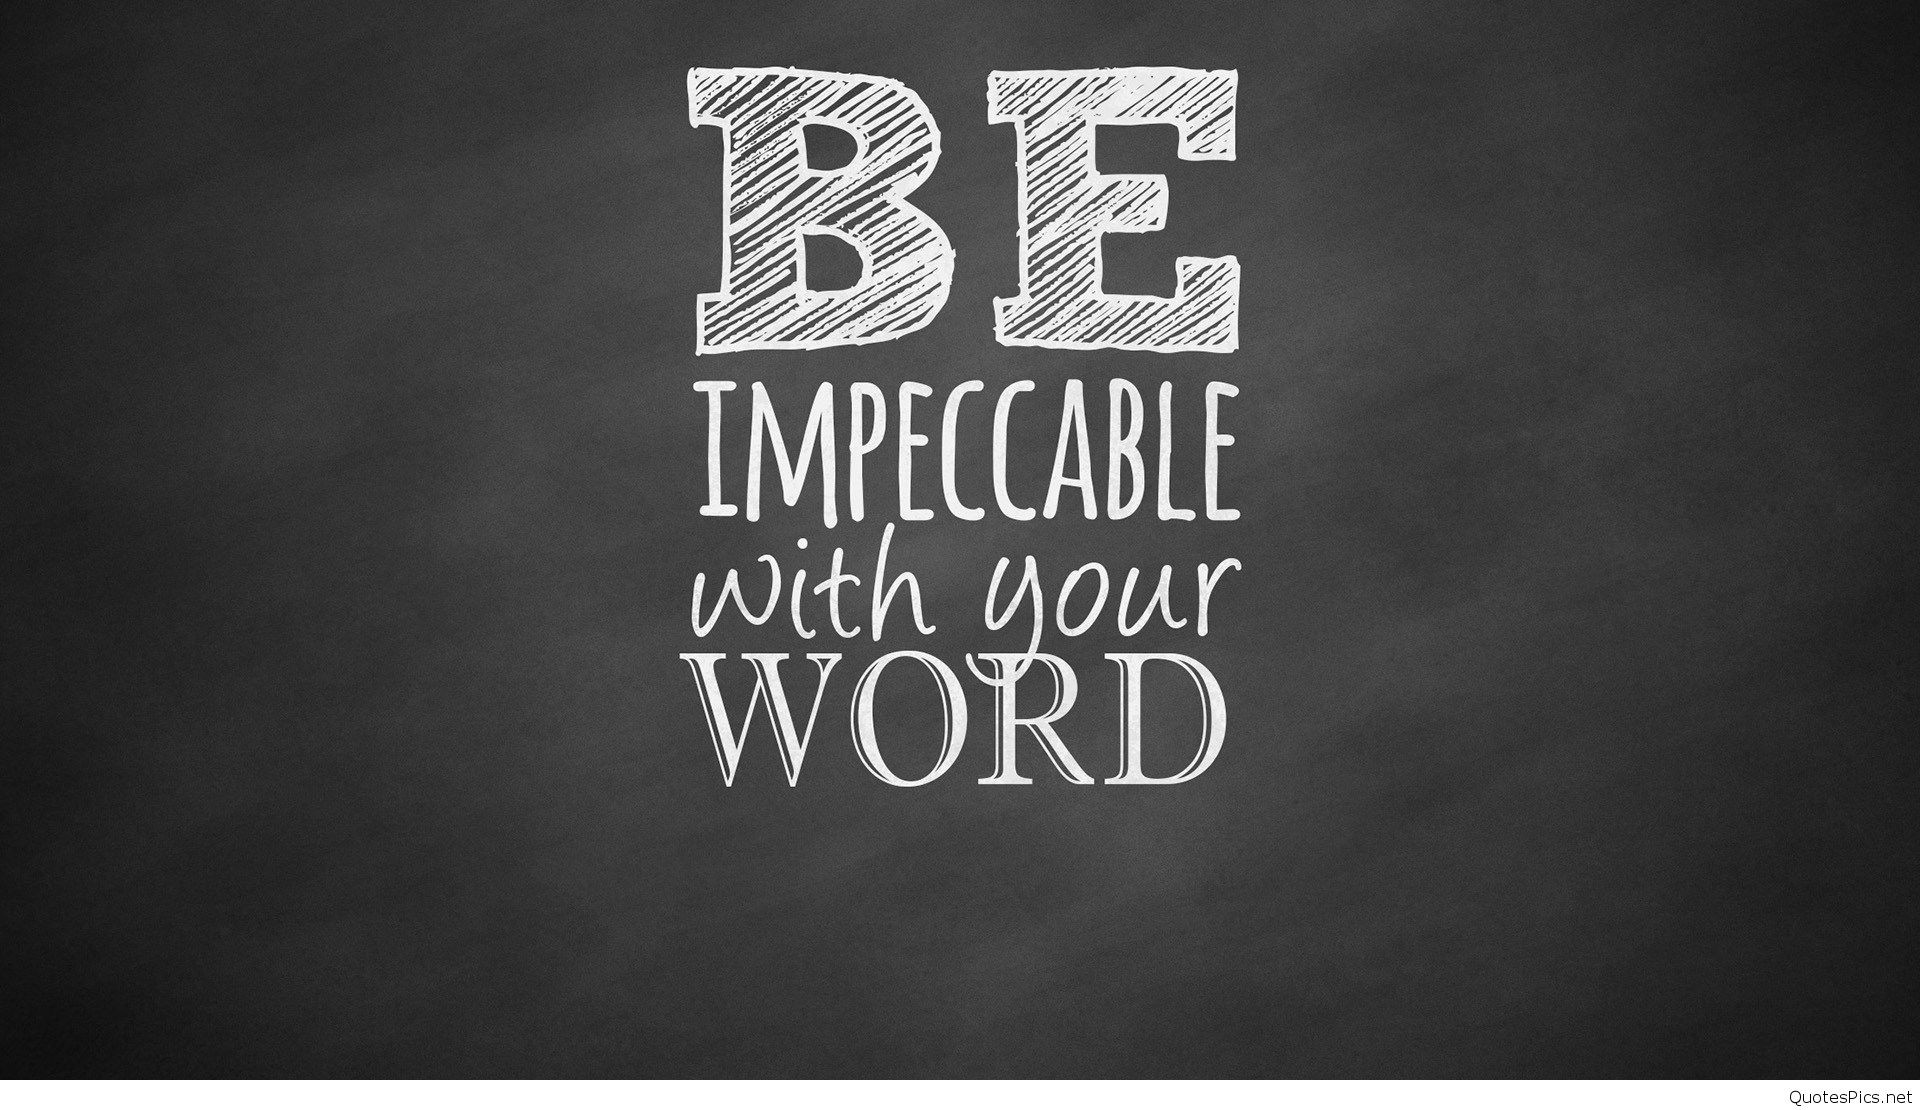 1920x1110 quote-be-impeccable-with-your-word-hd-wallpaper Â·  tumblr_m4wfx0beoh1qcu3tio1_500_large